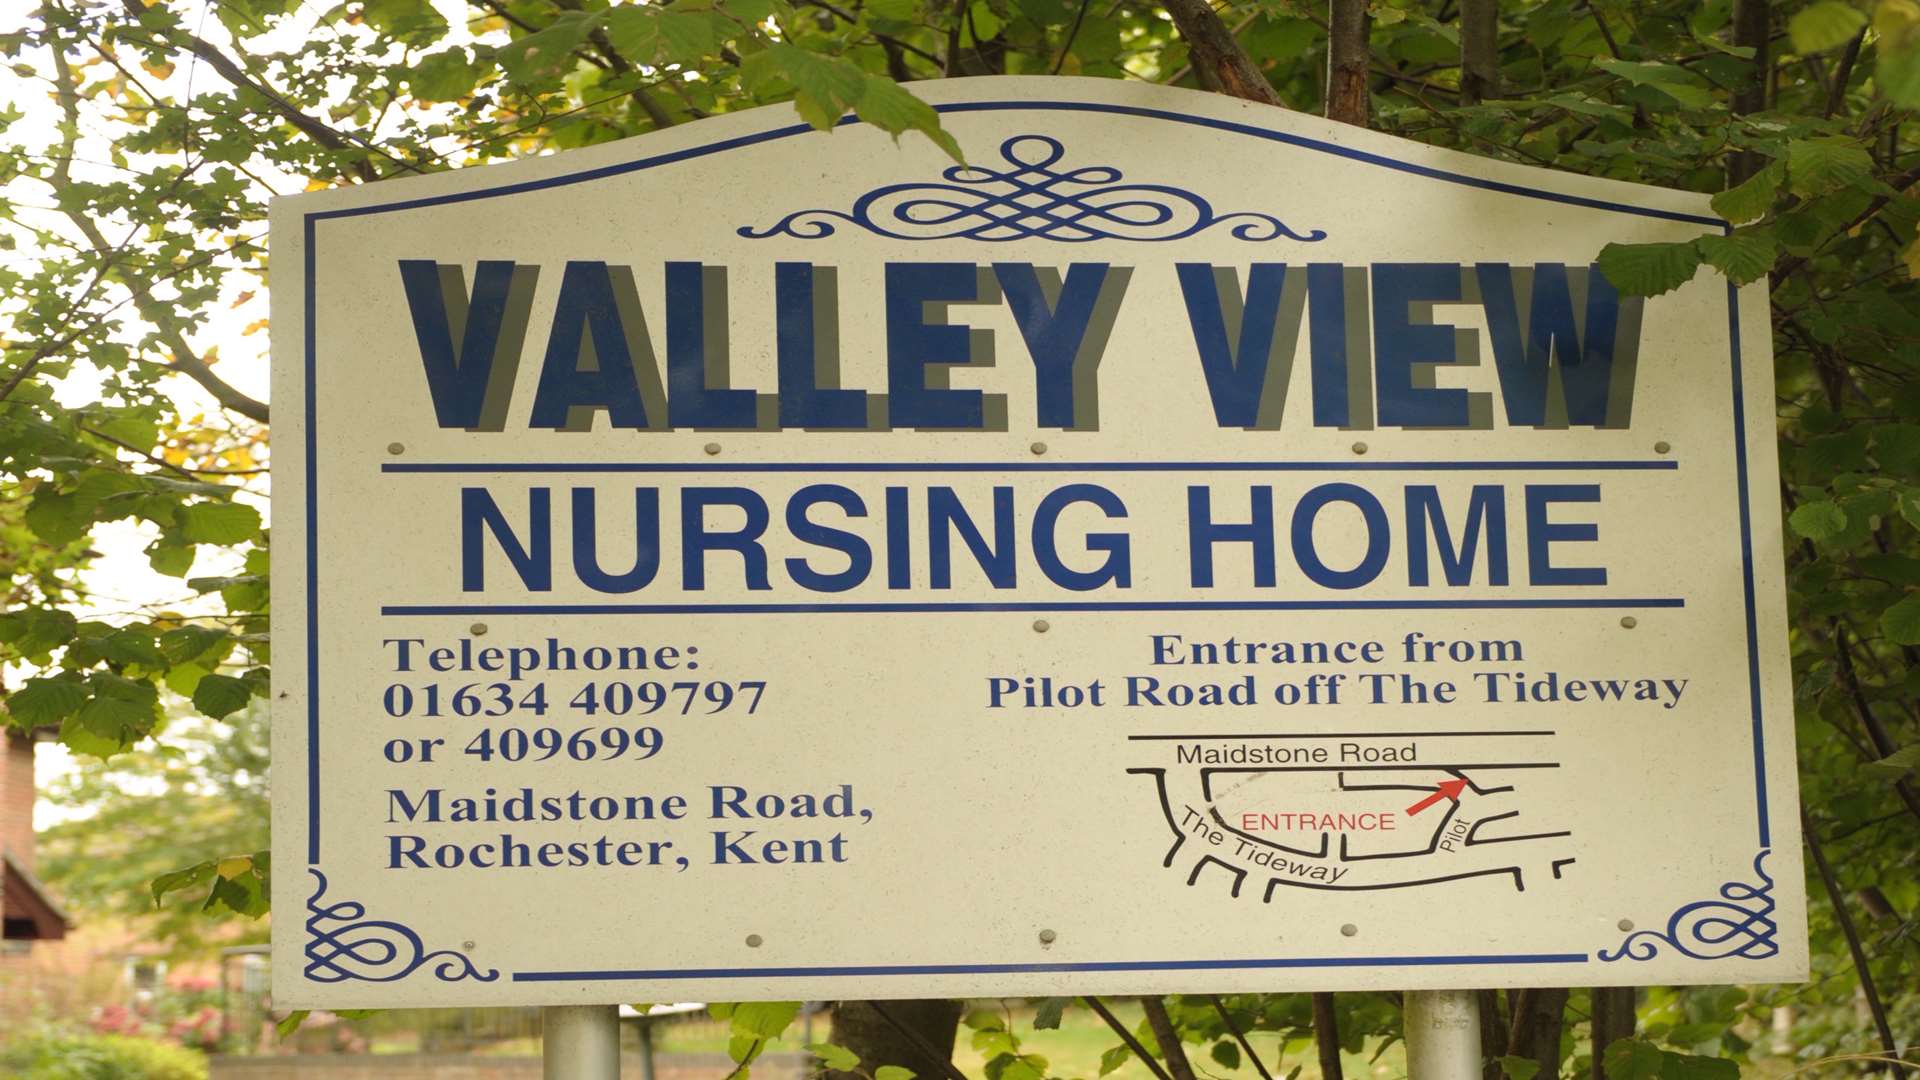 Valley View Nursing Home, Maidstone Road, Rochester